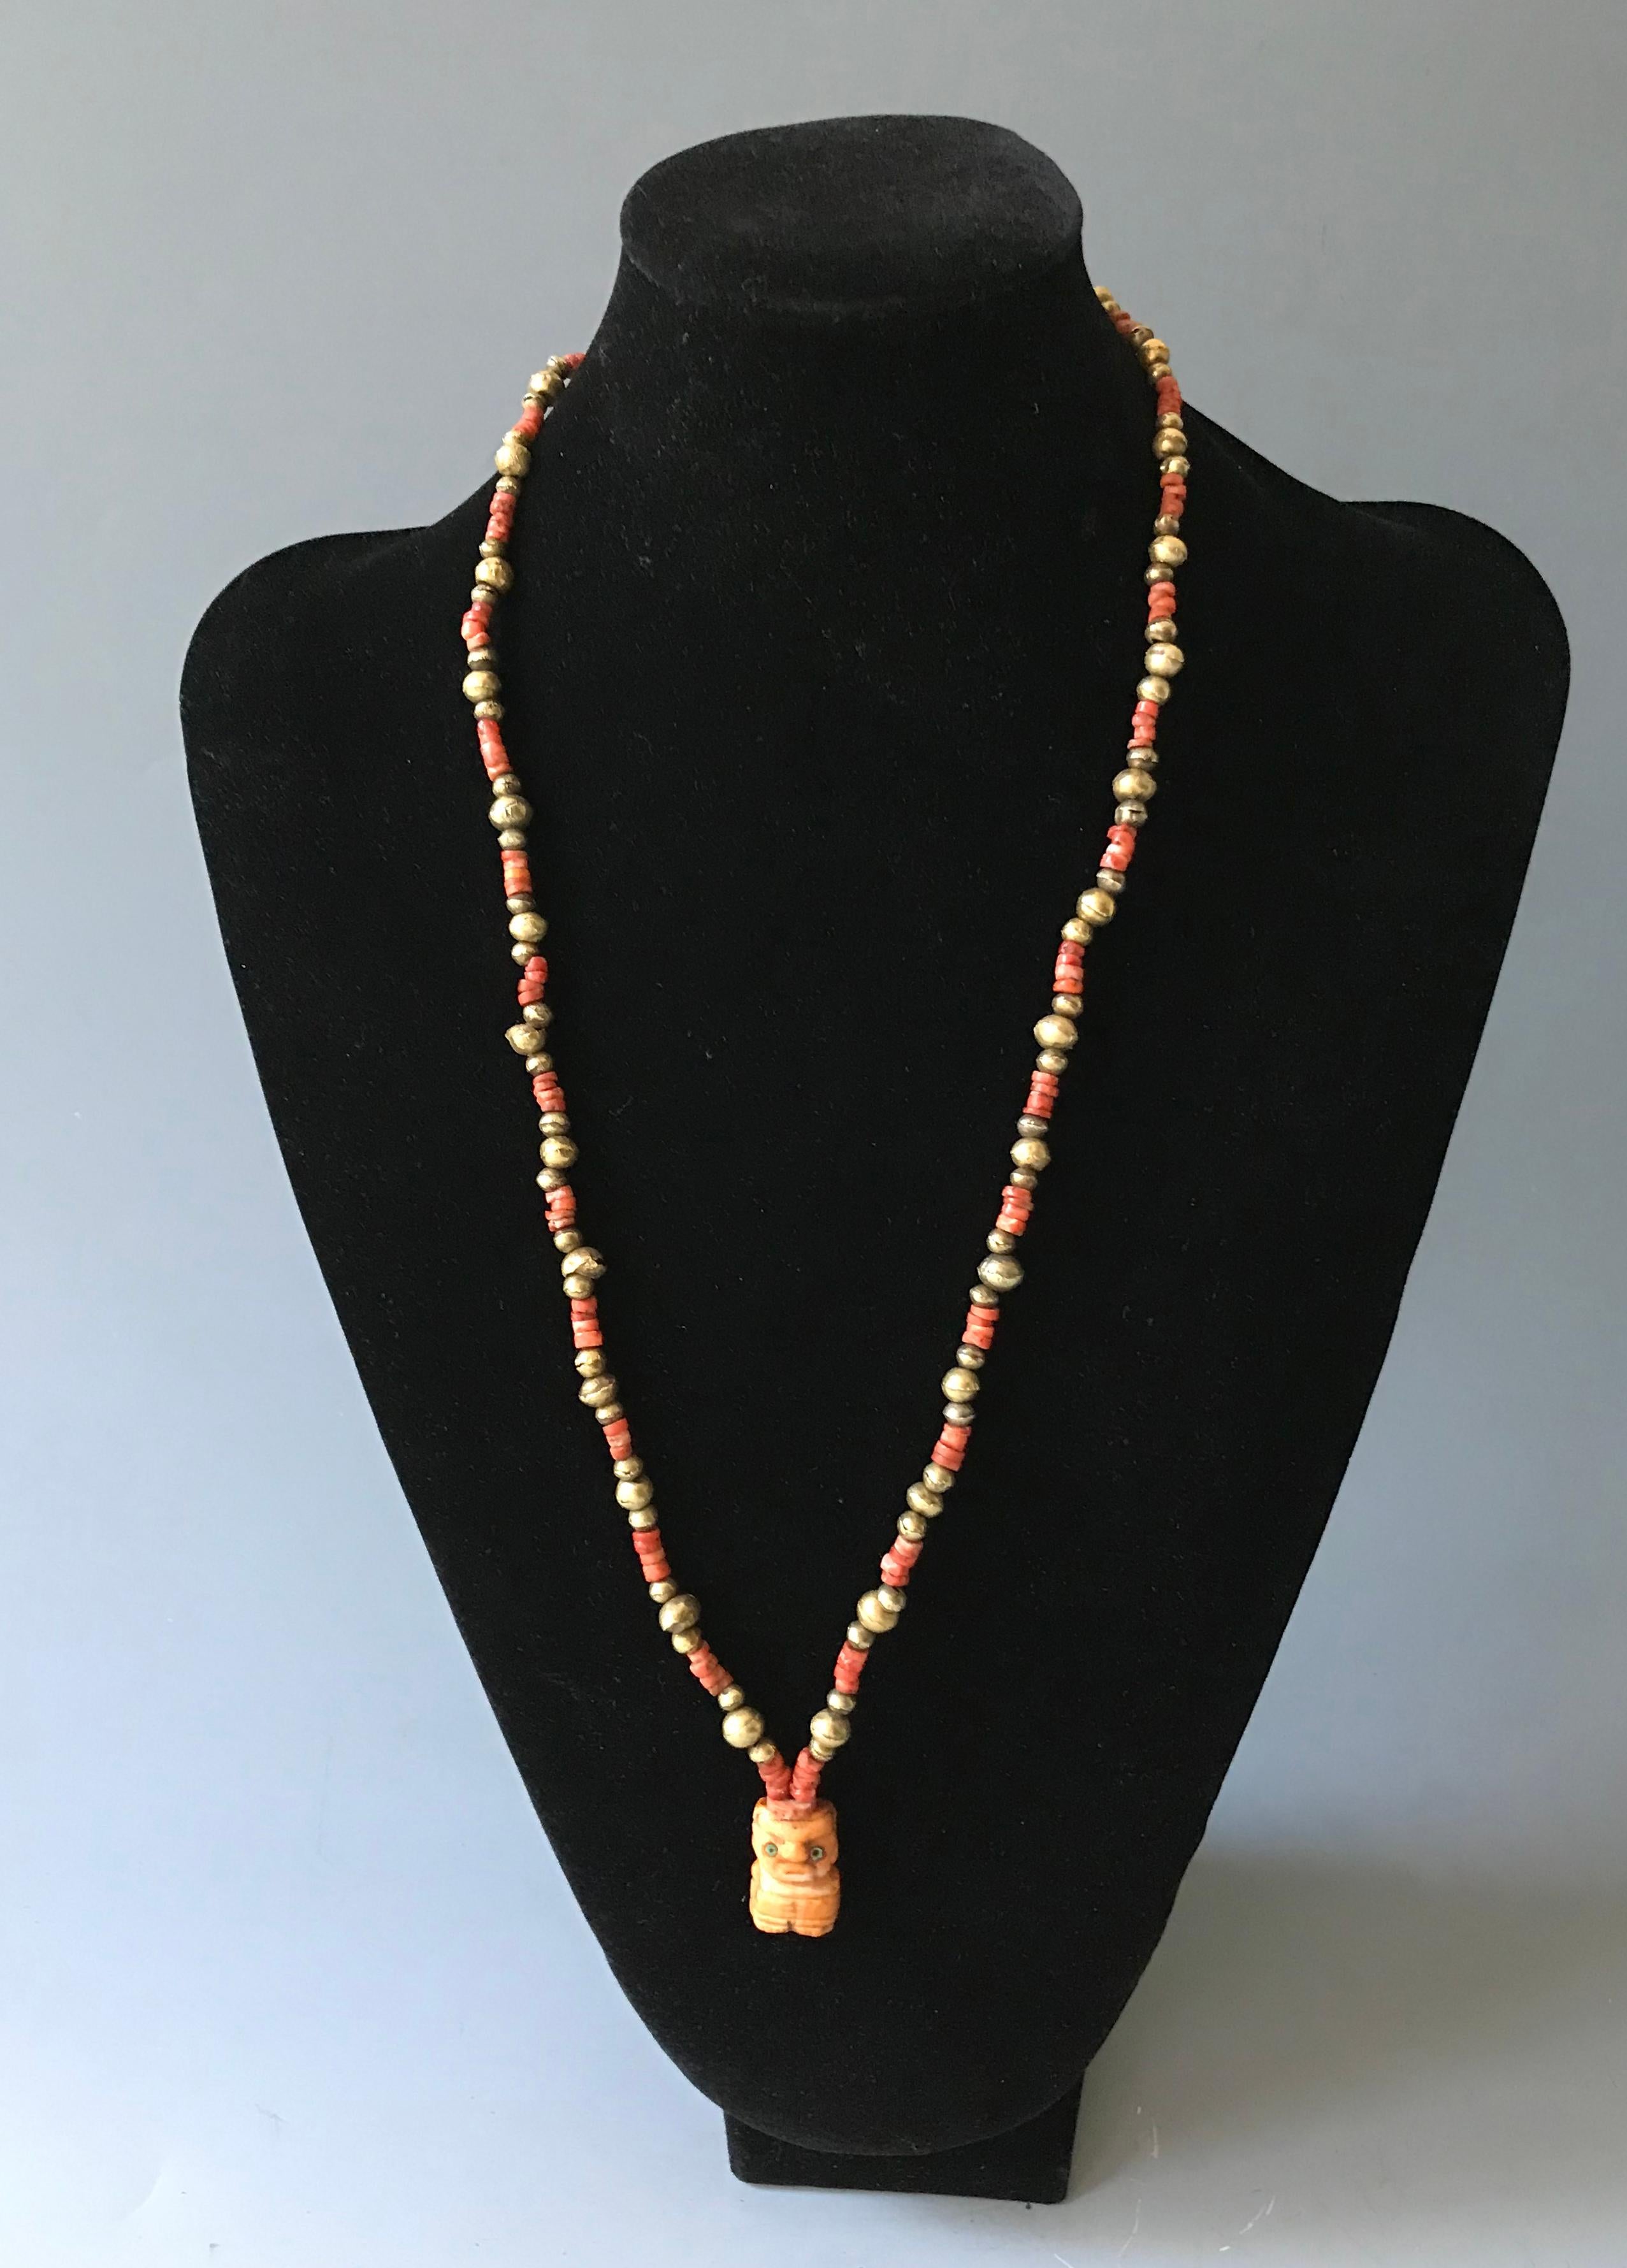 This wonderful Pre Columbian necklace features goldwork and Spondylus beads with carved figural pendant. ( Spoudylus is a type of Oyster commonly known as Spinly Sea Oster the shell resembling Coral is only found off the coast of northern Peru and